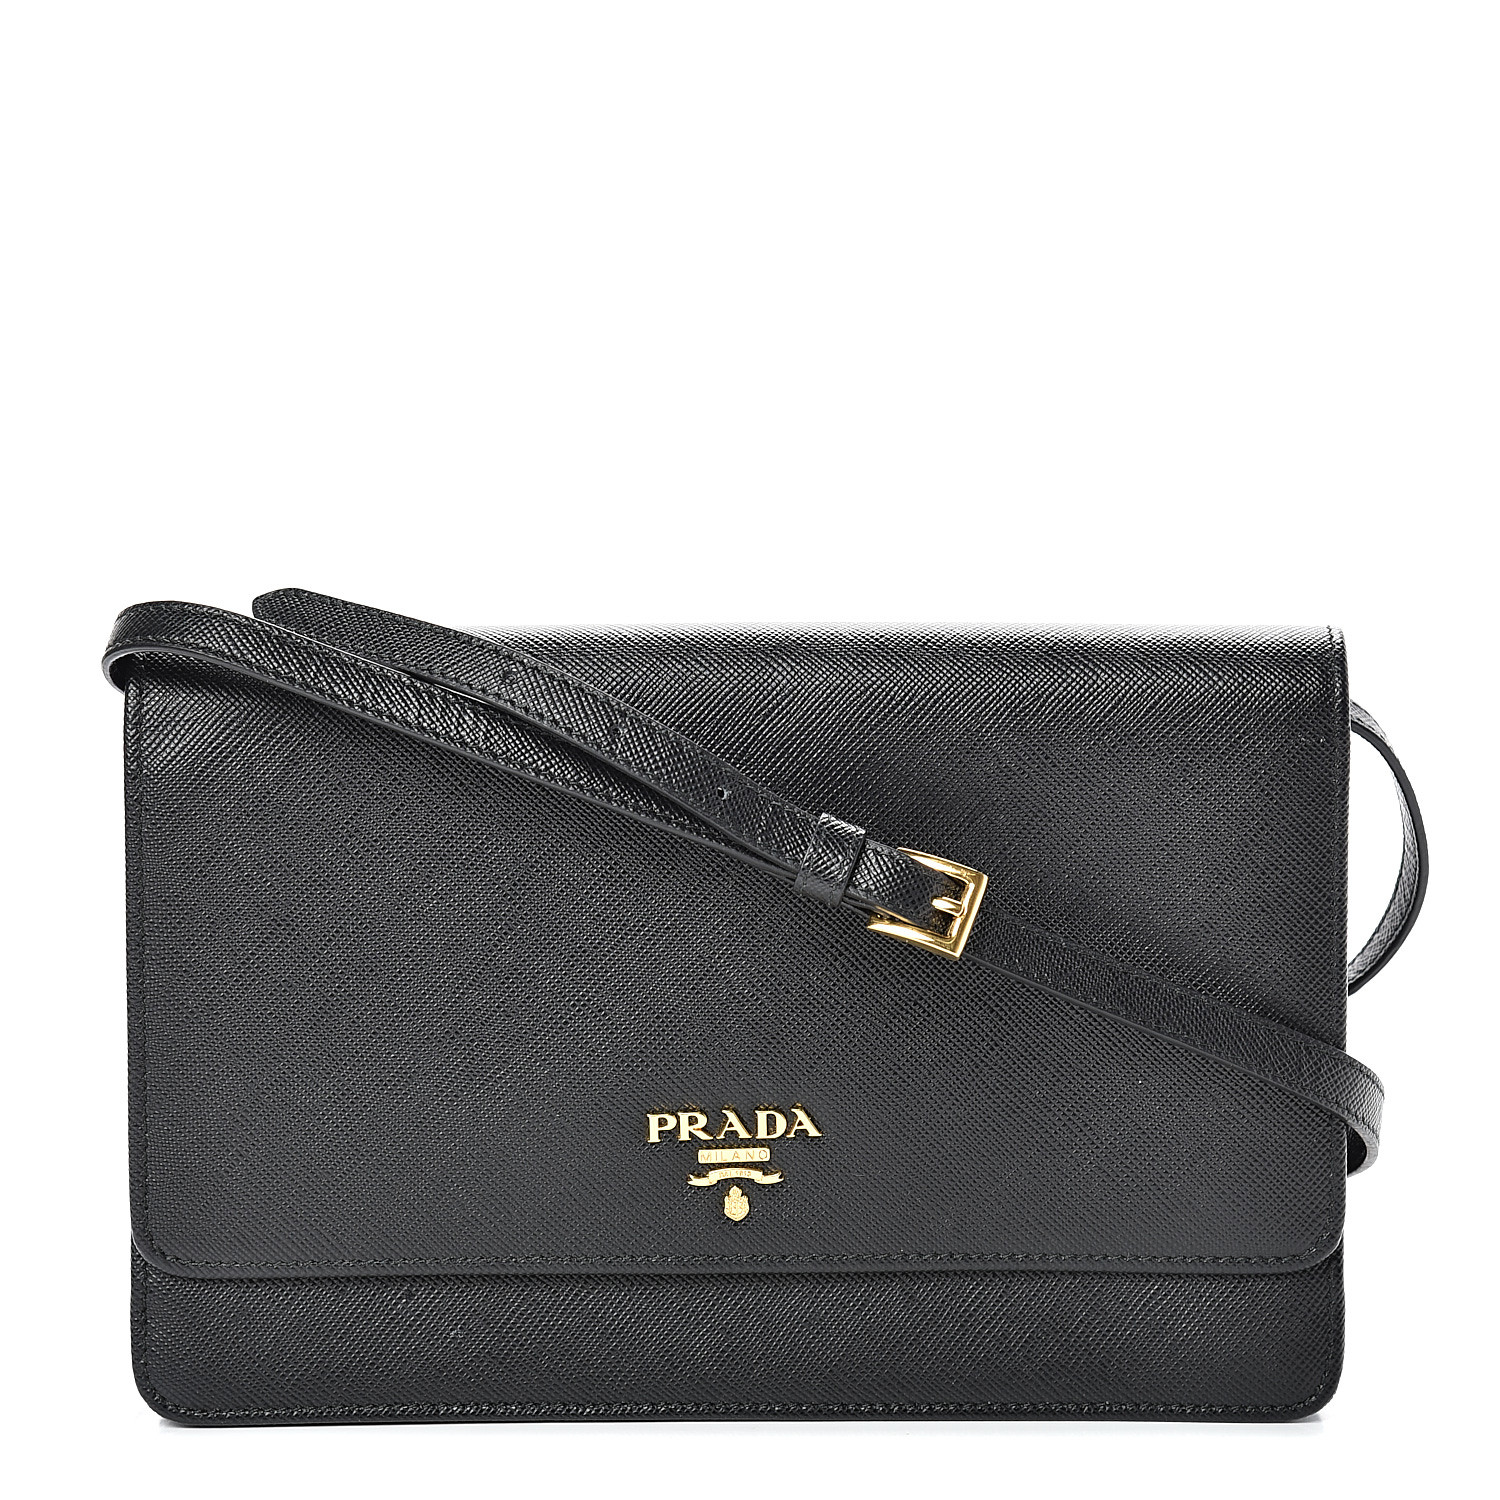 prada wallet with strap